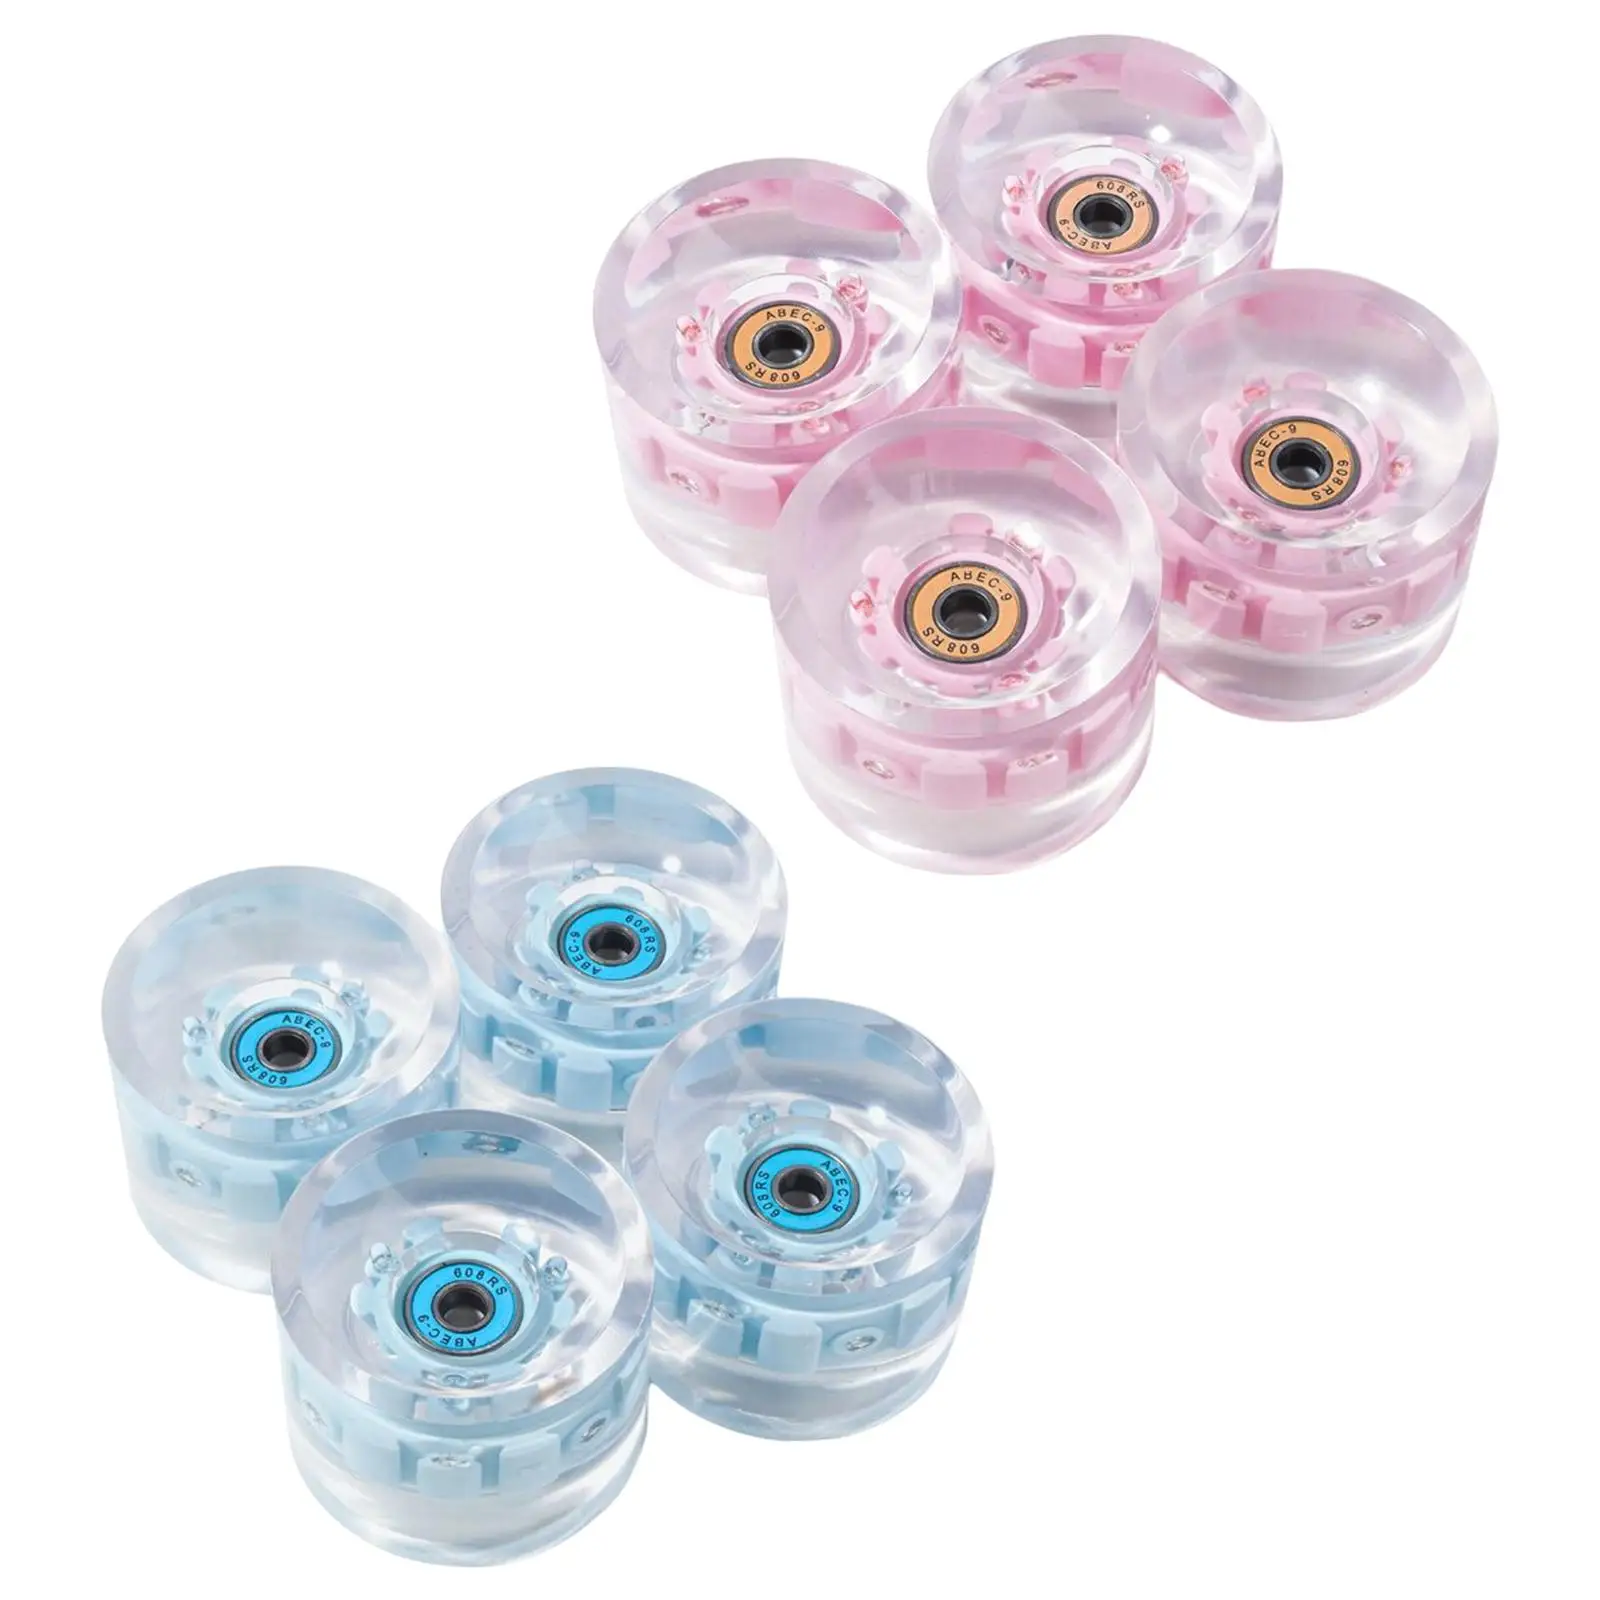 Skateboard Wheels 78A Hardness with Bearings Accessories Replacement Roller